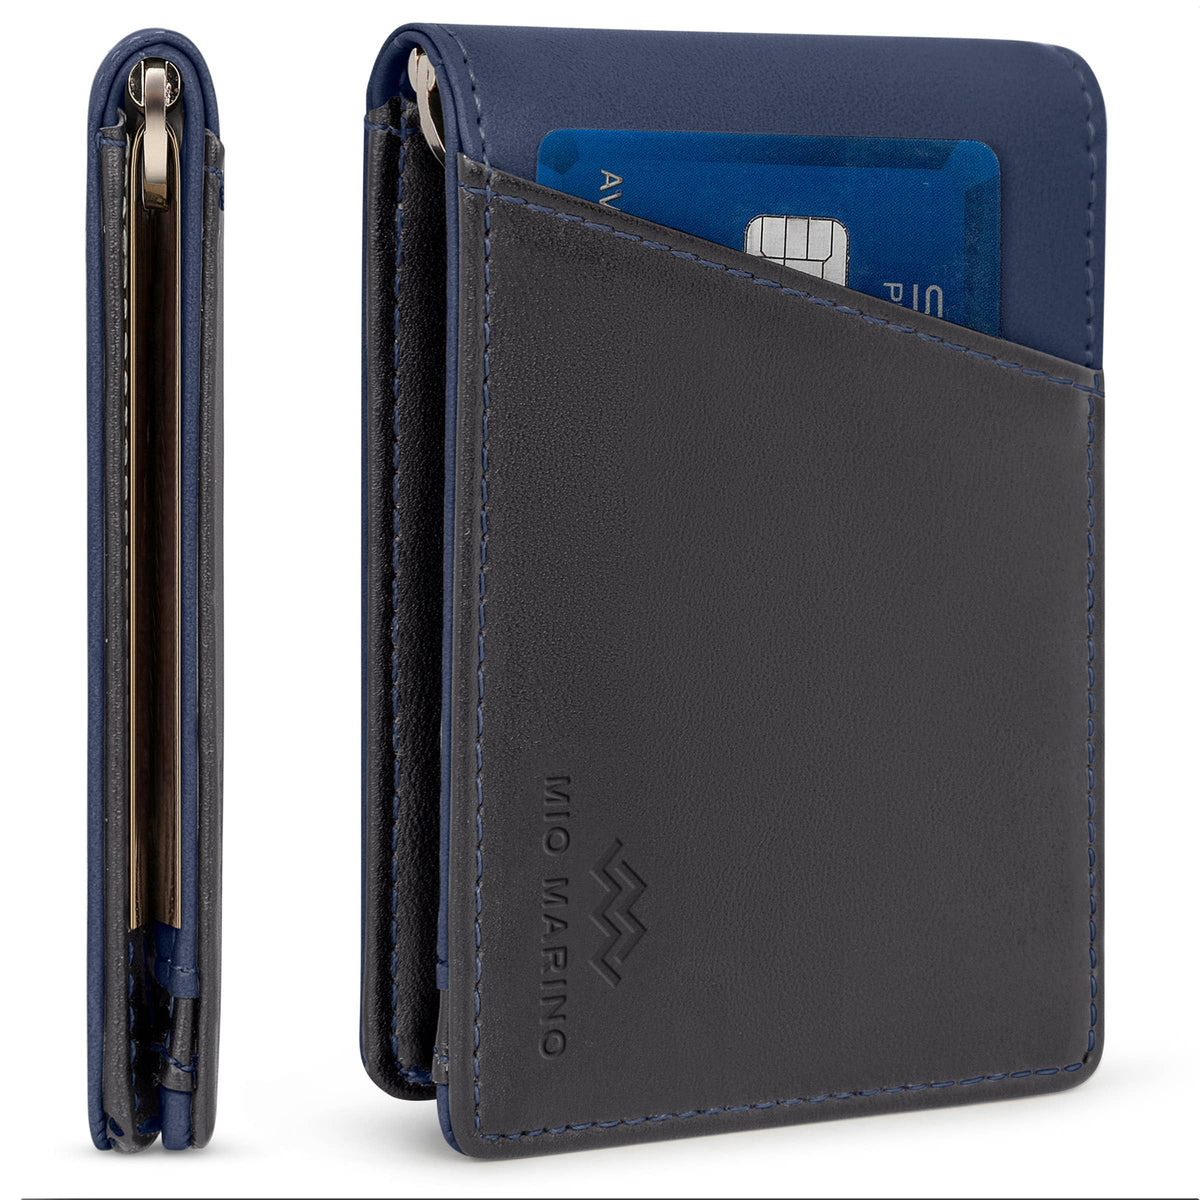 Mio Marino - Men's Slim Bifold Wallet with Quick Access Pull Tab: Gray/Beige - WALLET - Synik Clothing - synikclothing.com